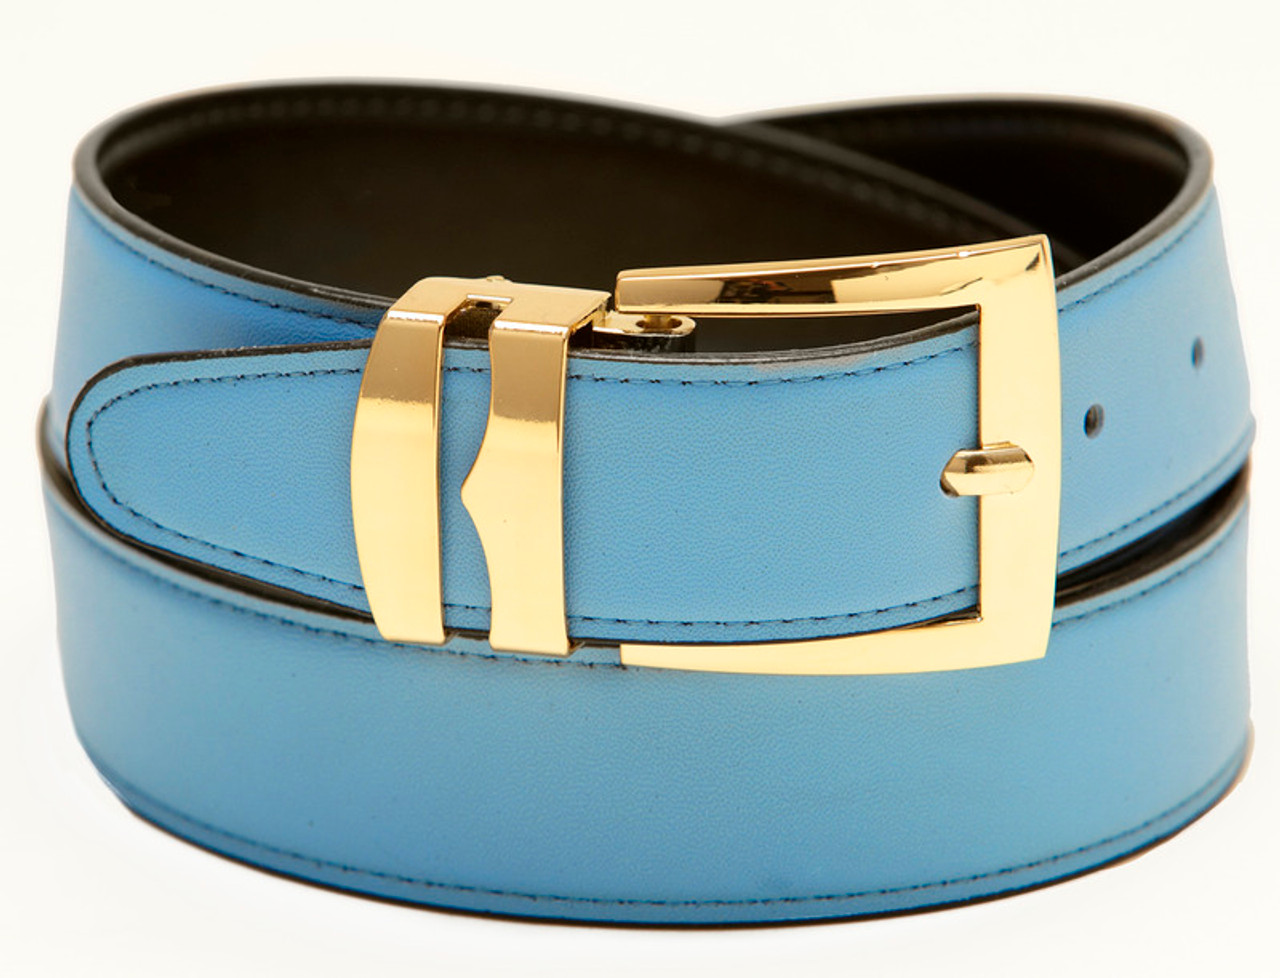 Reversible Belt Wide Bonded Leather ROYAL BLUE / Black with White Stitching  Gold-Tone Buckle